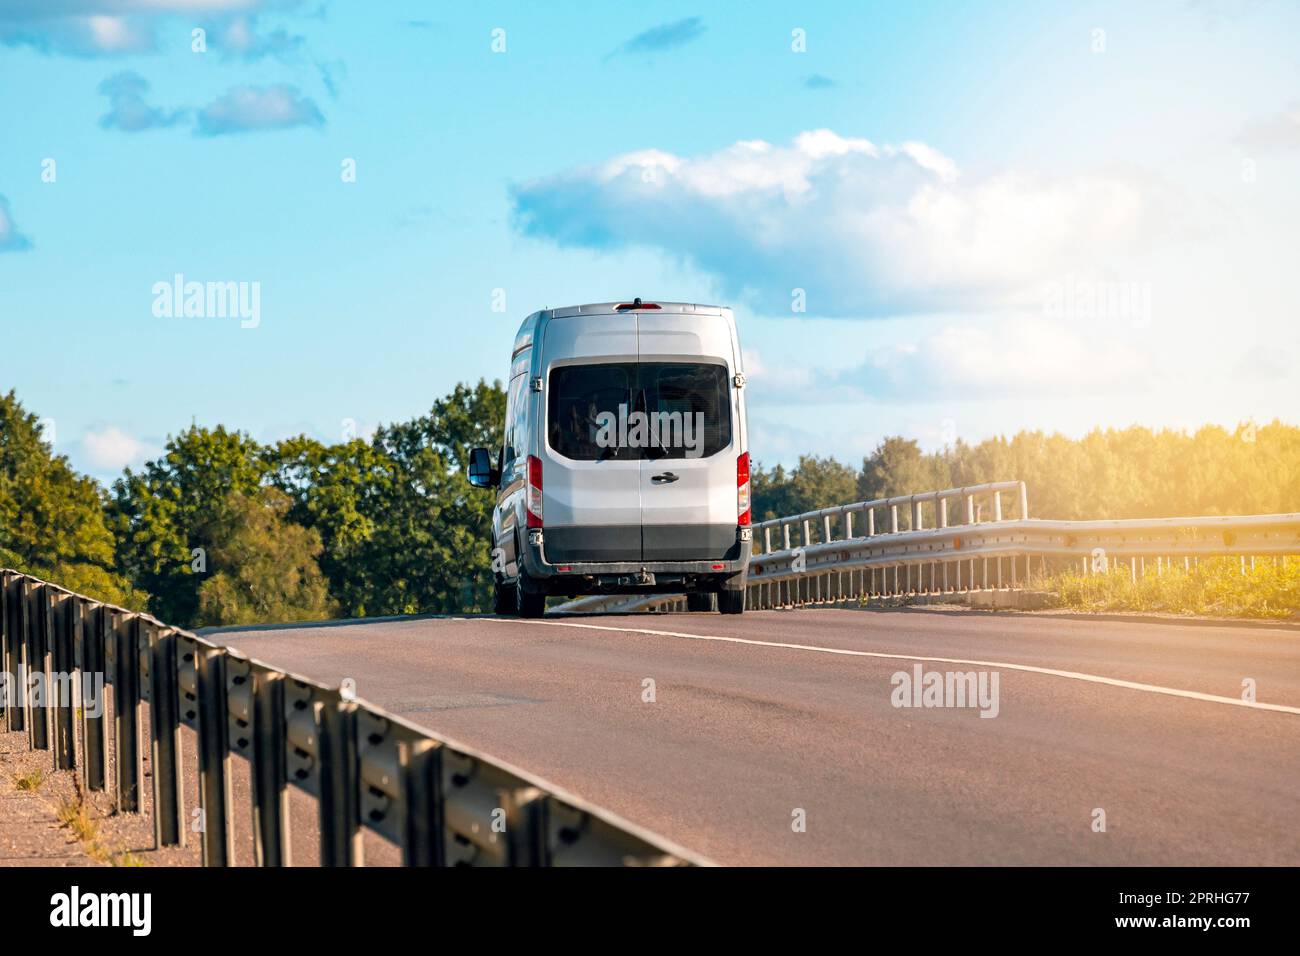 Car on the road with metal safety barrier or rail Stock Photo